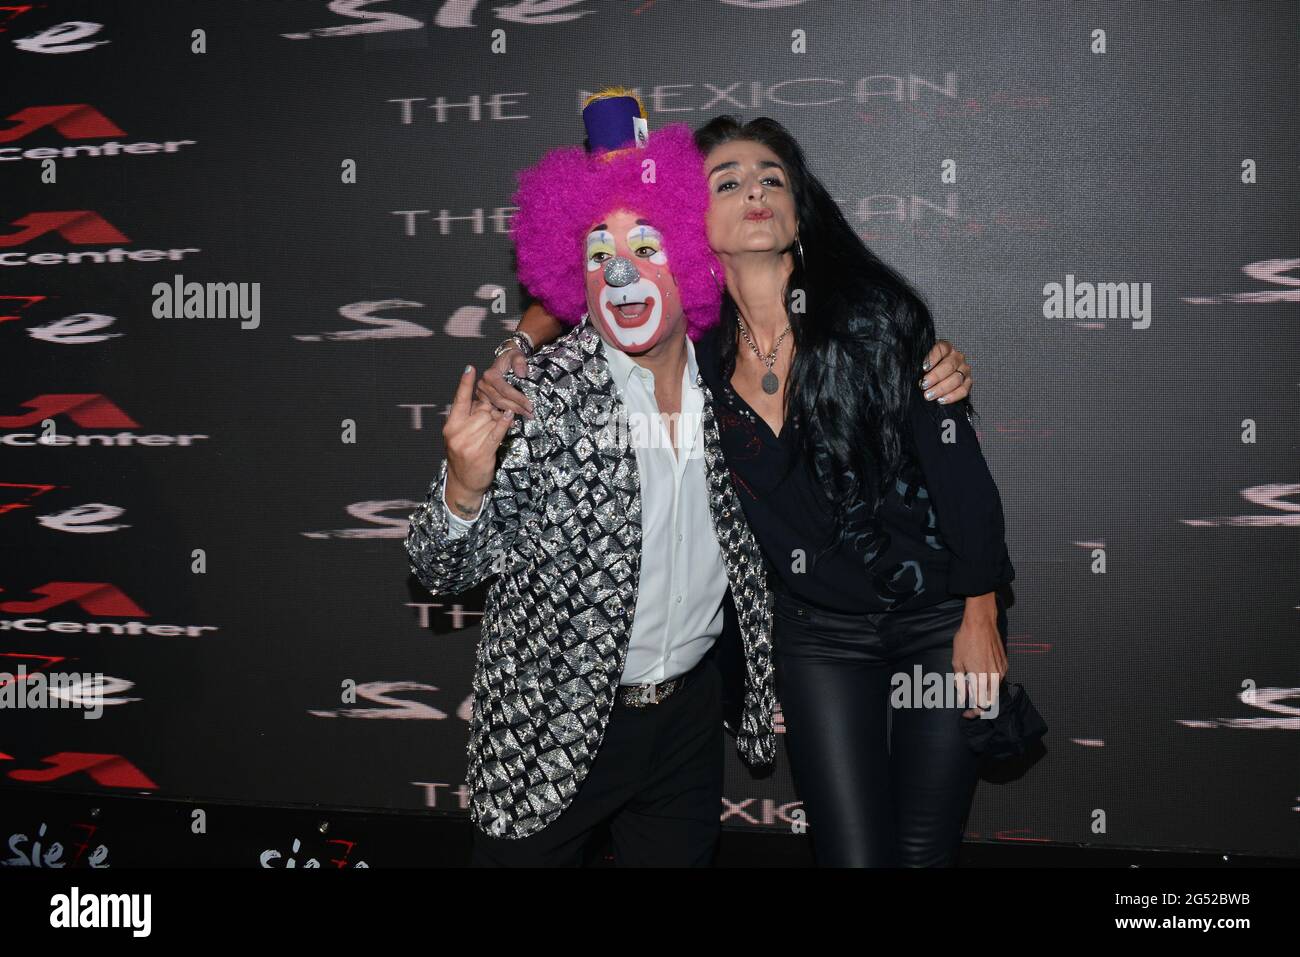 Mexico City, Mexico. 24th June, 2021. Mexico City, Mexico, June 24, 2021. Actress Barbara Torres and Sergio Verduzco ‘Platanito' pose for photos during the black carpet of the musical Siete at Pepsi Center . Credit: Carlos Tischler/Eyepix Group/Alamy Live News Credit: Eyepix Group/Alamy Live News Stock Photo